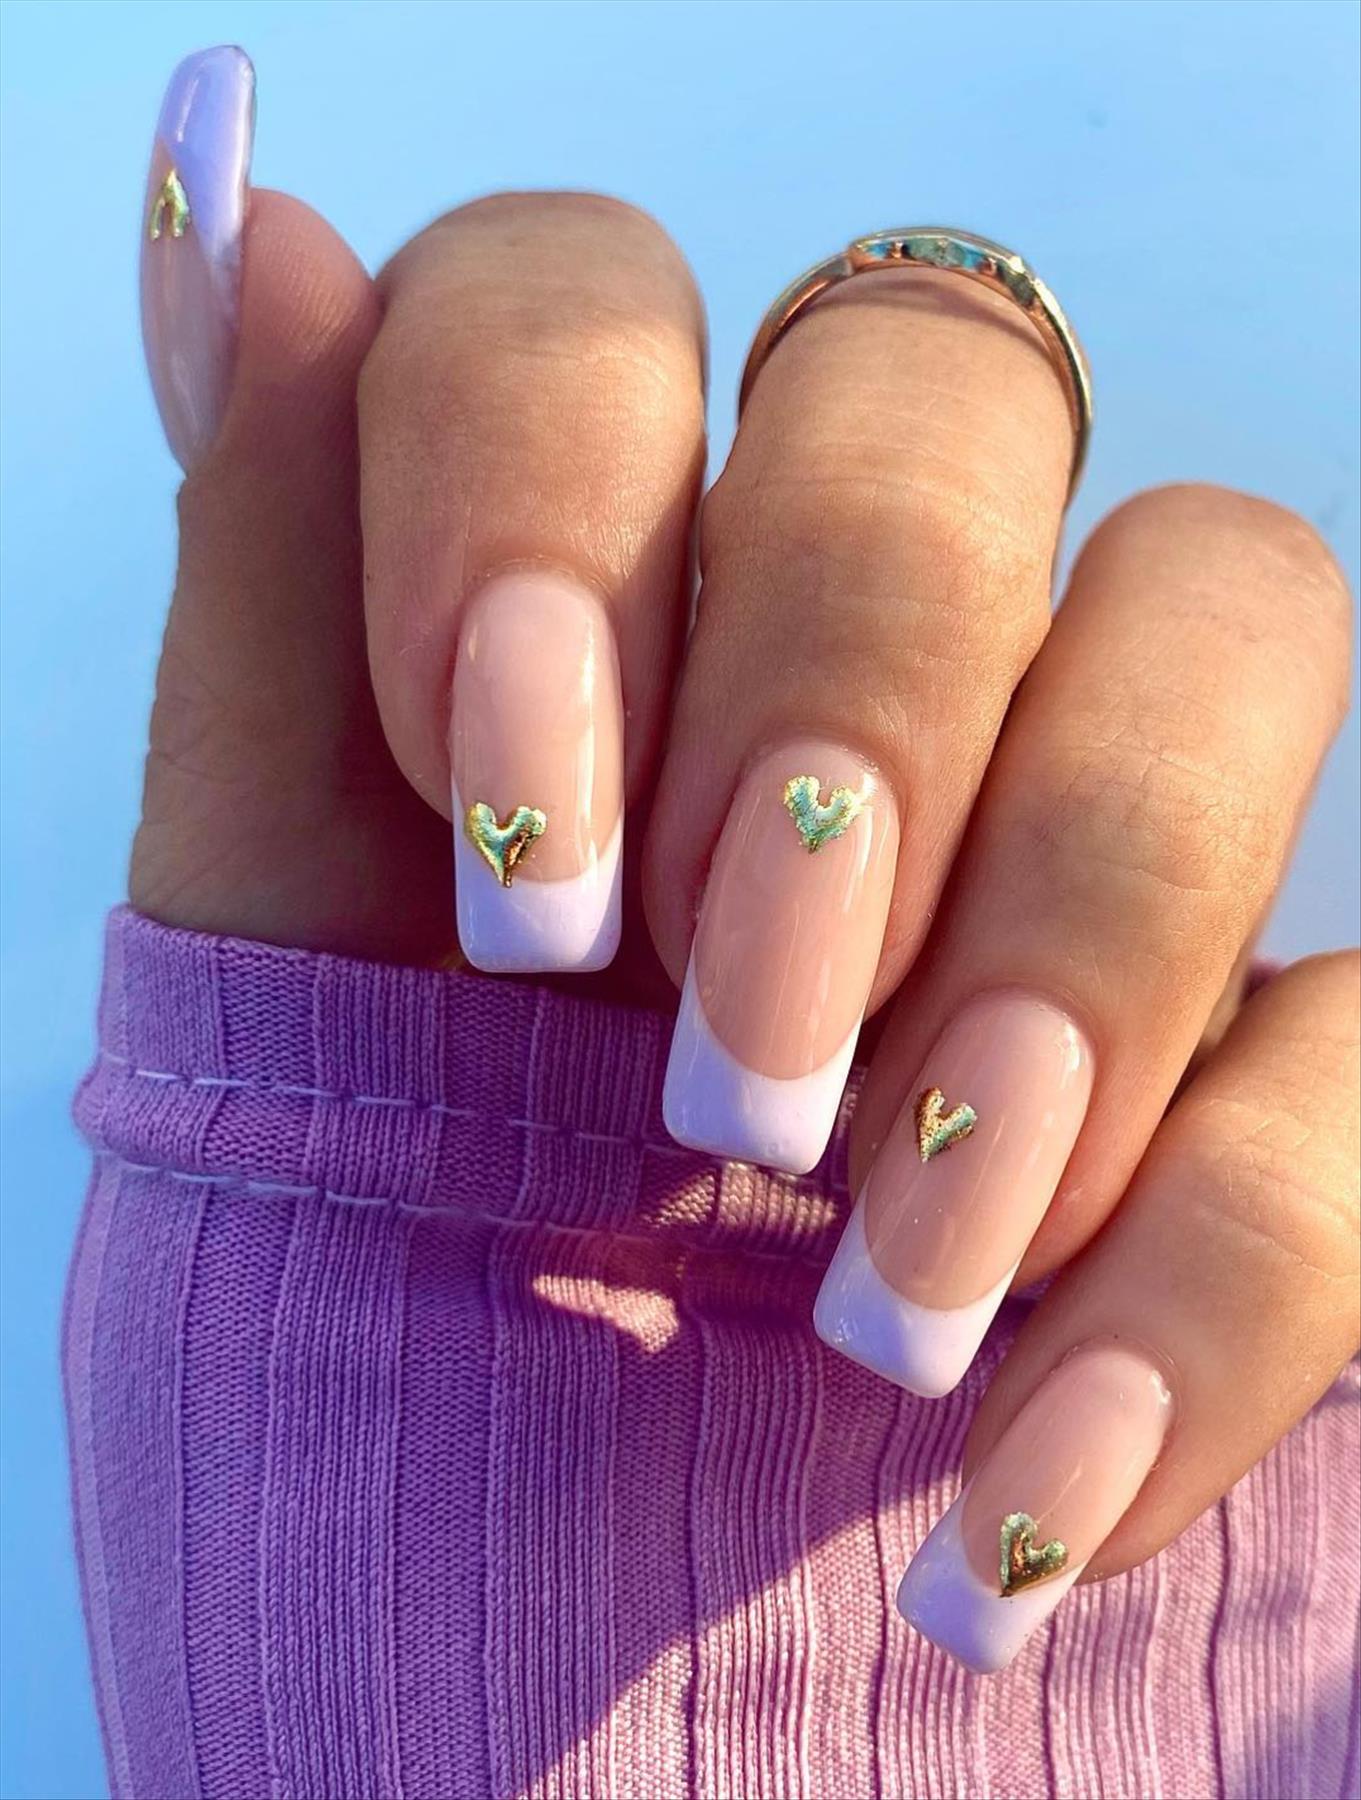 Best Nude Nail Designs to Try ASAP